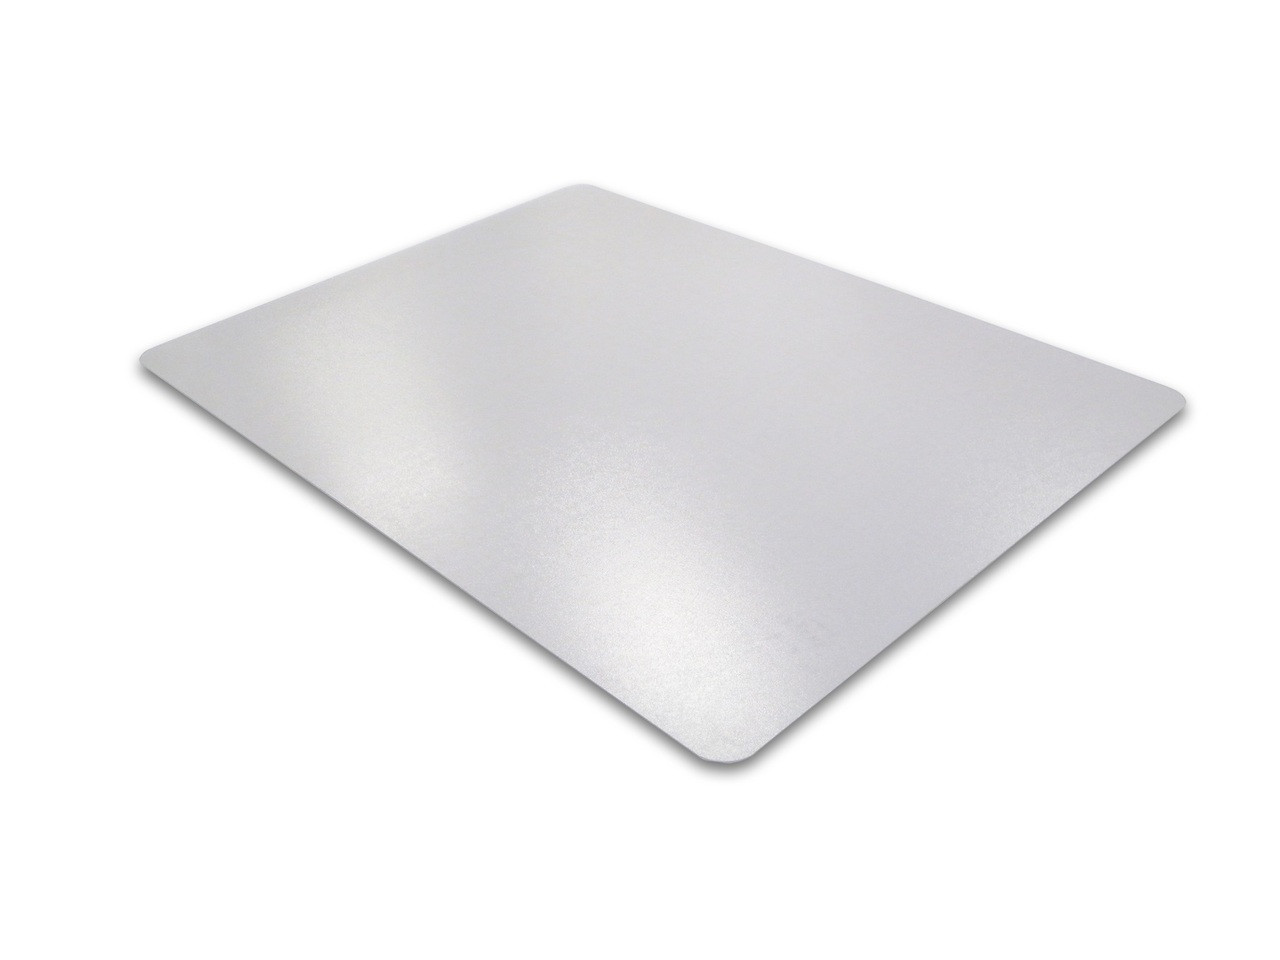 https://cdn11.bigcommerce.com/s-fjwps1jbkv/images/stencil/1280x1280/products/322/3552/cleartex-polycarbonate-floor-protector-exercise-mat-for-home-gyms-exercise-and-fitness-or-for-hard-floors-or-clear-or-rectangular-or-multiple-sizes__77618.1688992724.jpg?c=2?imbypass=on